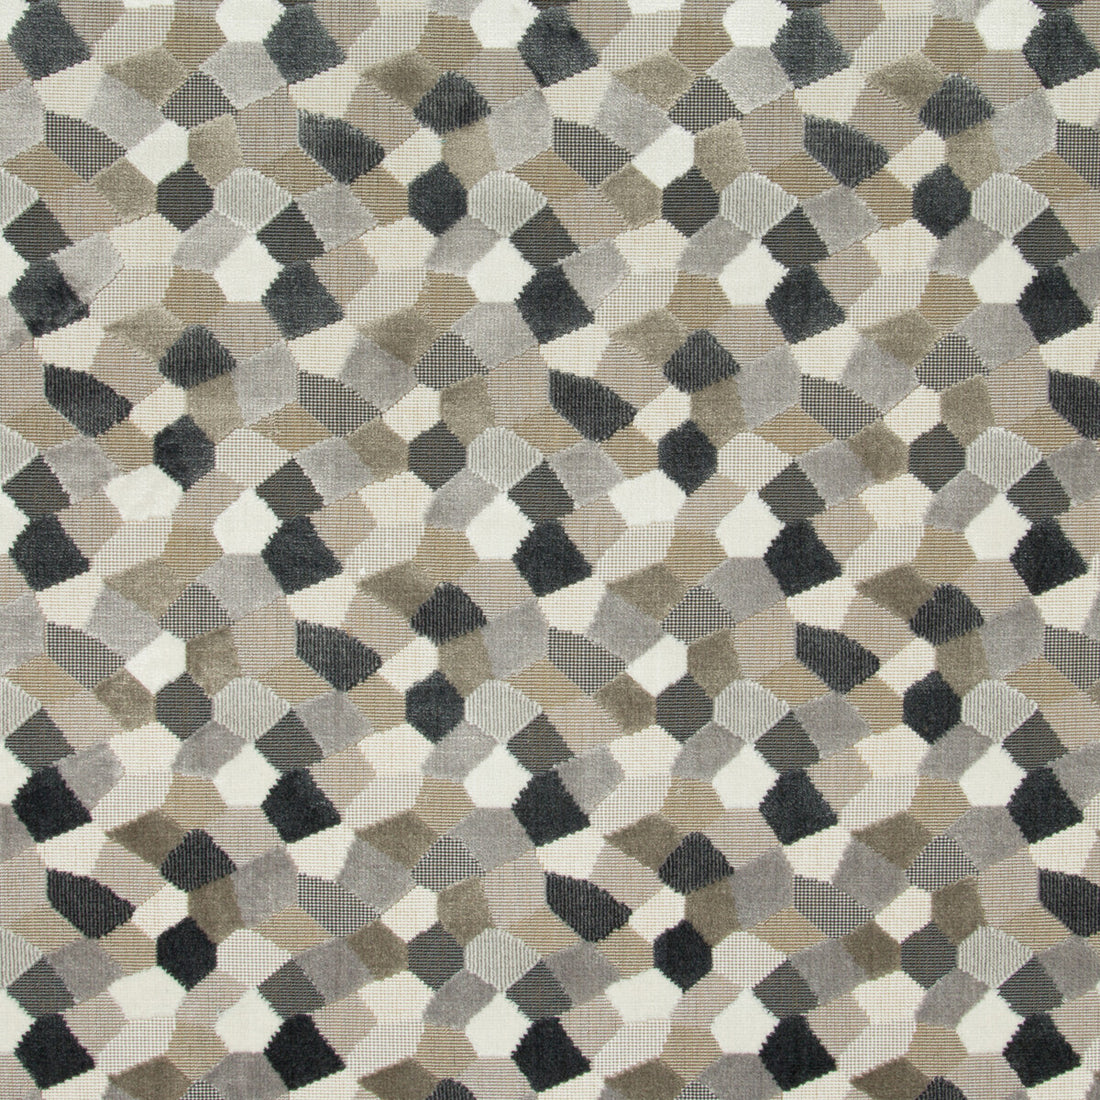 Modern Mosaic fabric in silver color - pattern 34783.611.0 - by Kravet Couture in the Artisan Velvets collection